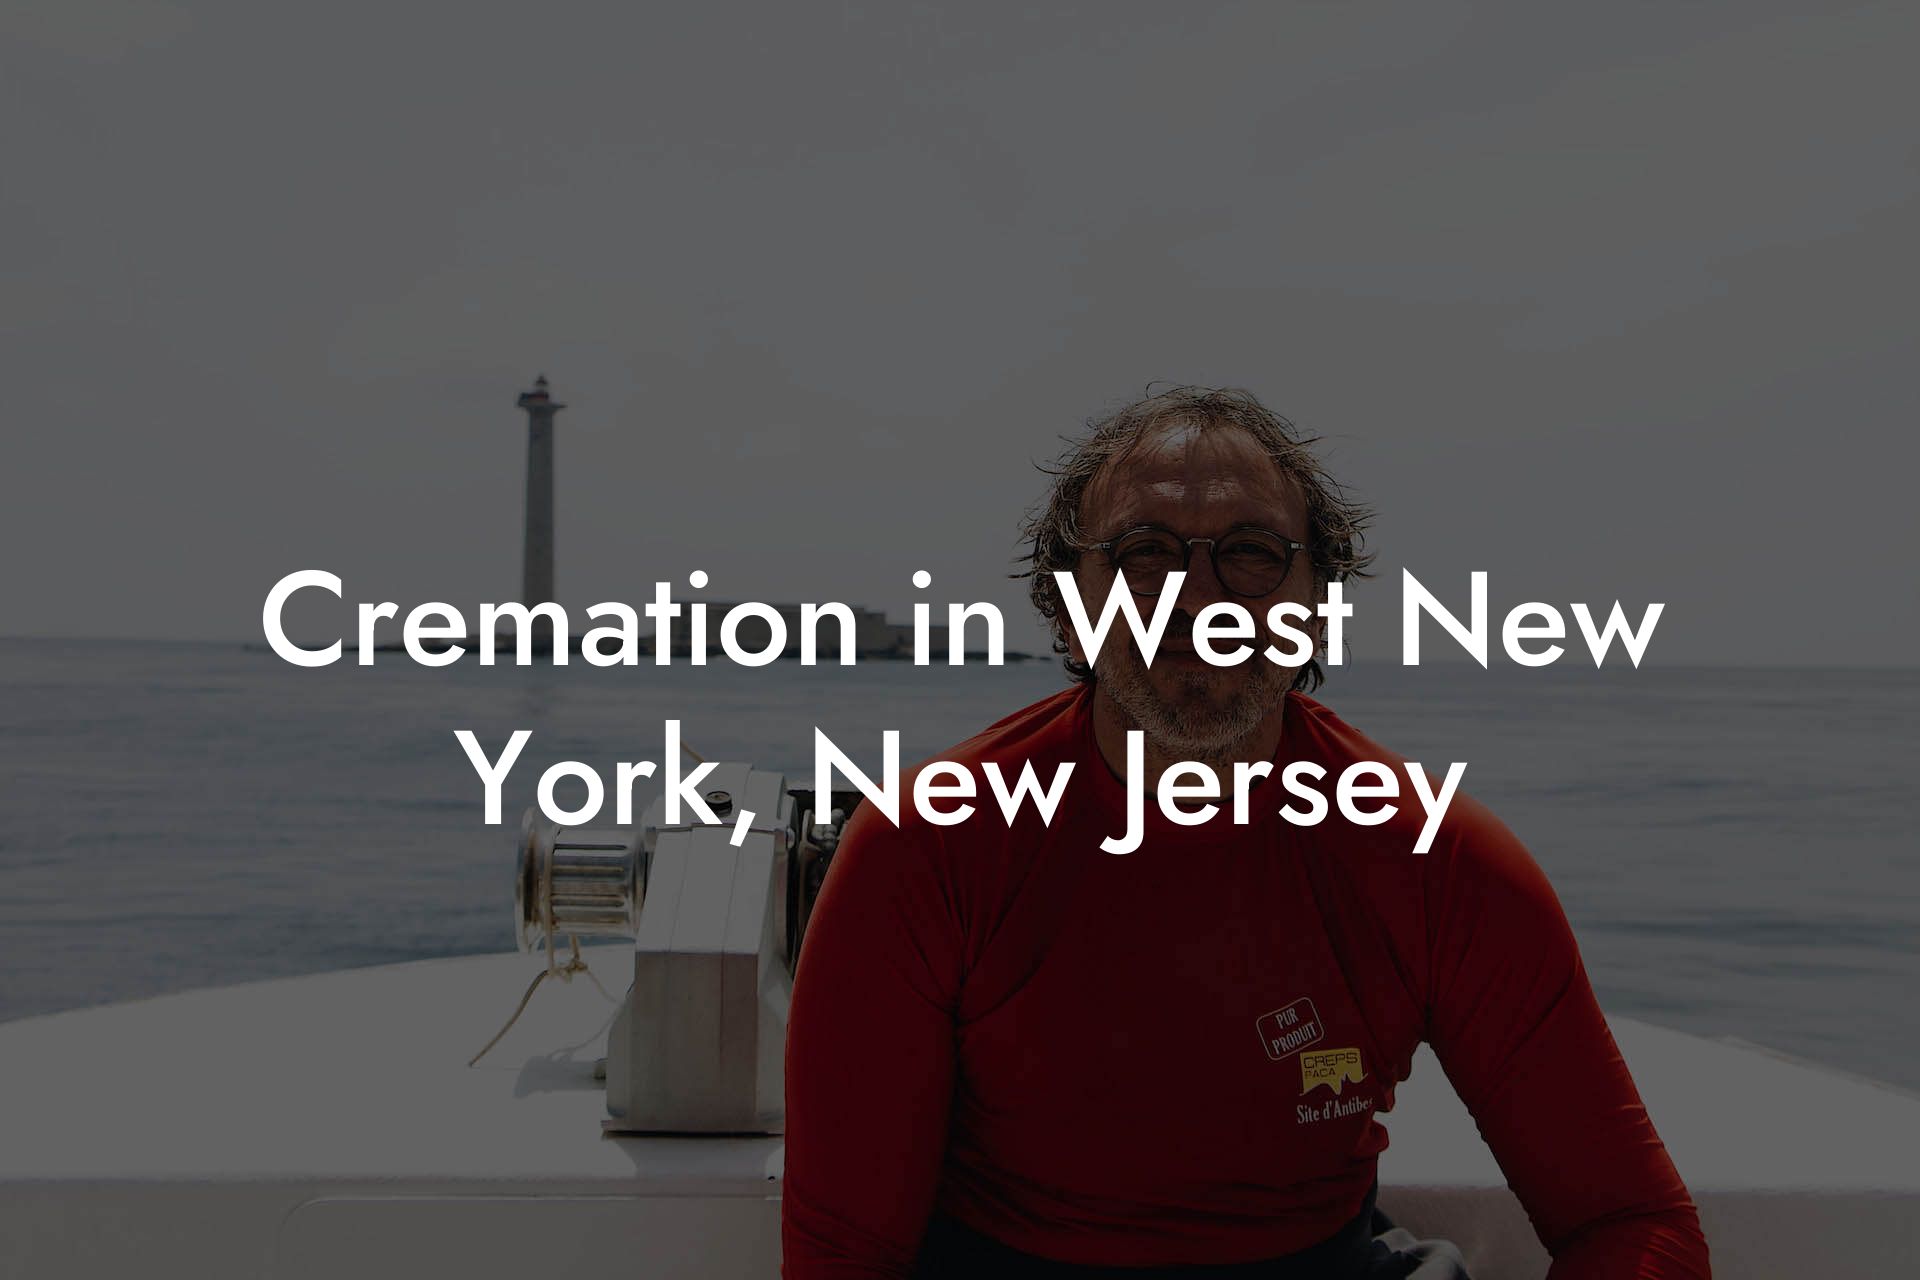 Cremation in West New York, New Jersey